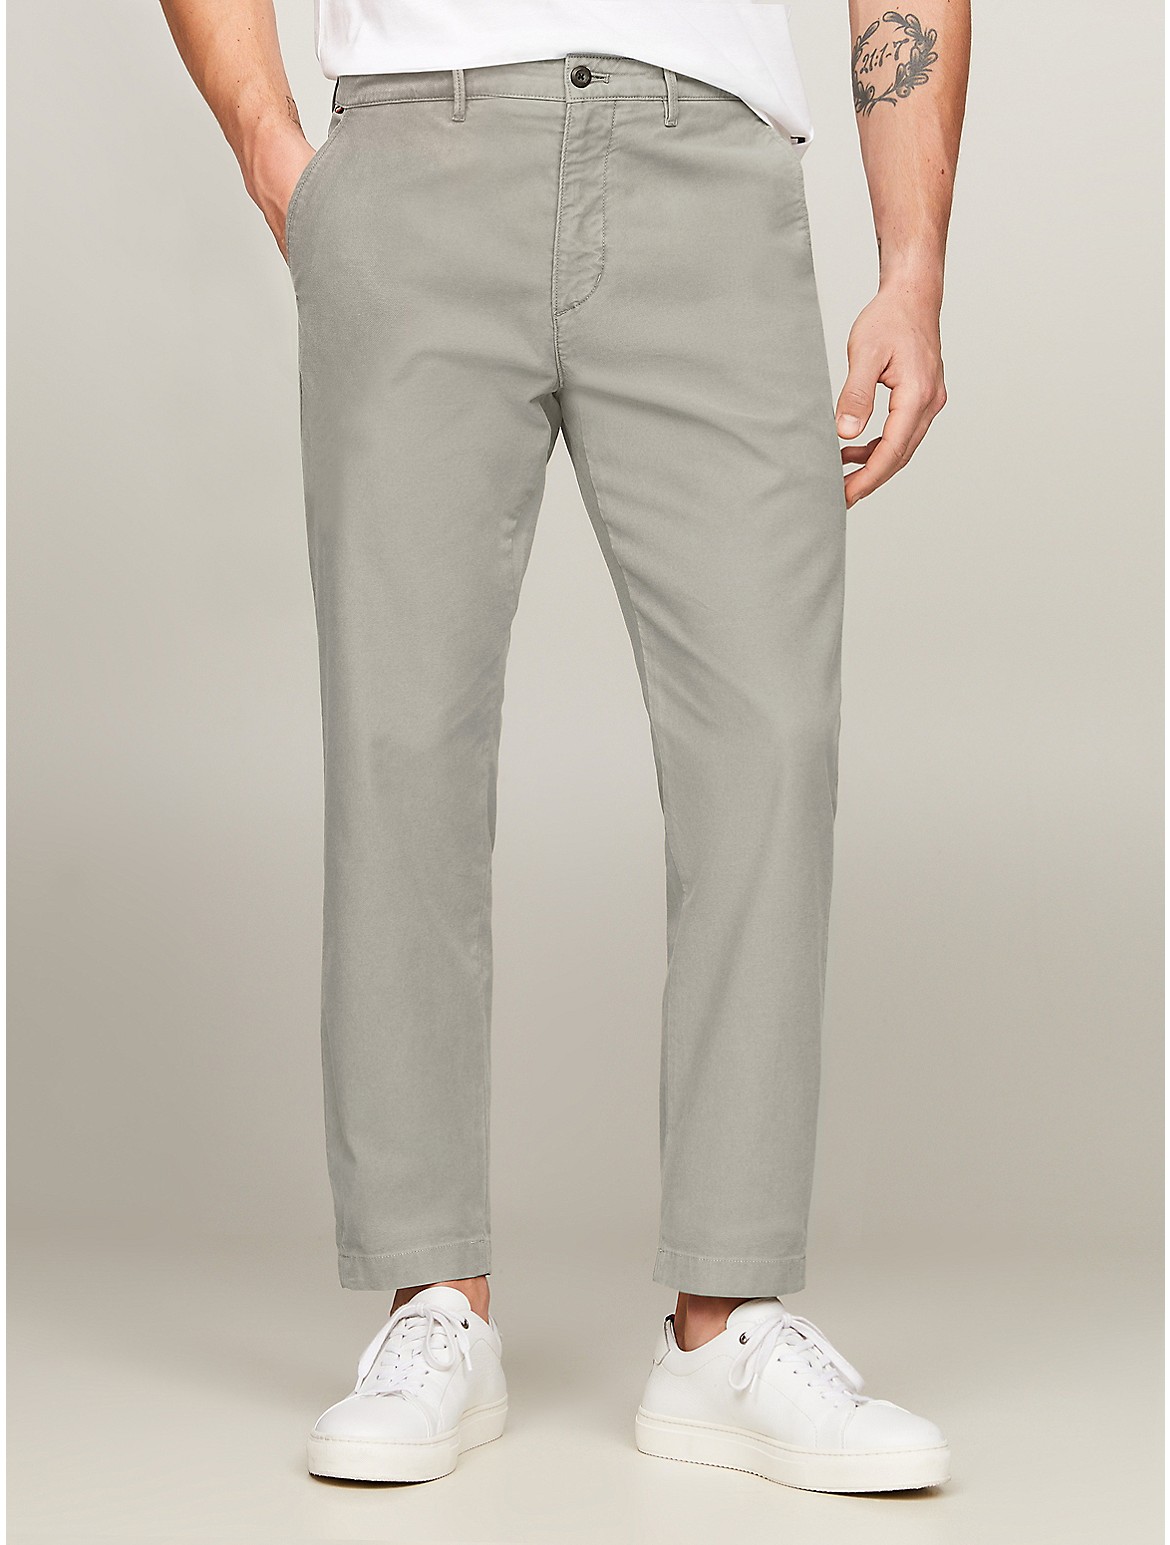 Tommy Hilfiger Men's Harlem Relaxed Tapered Fit Chino